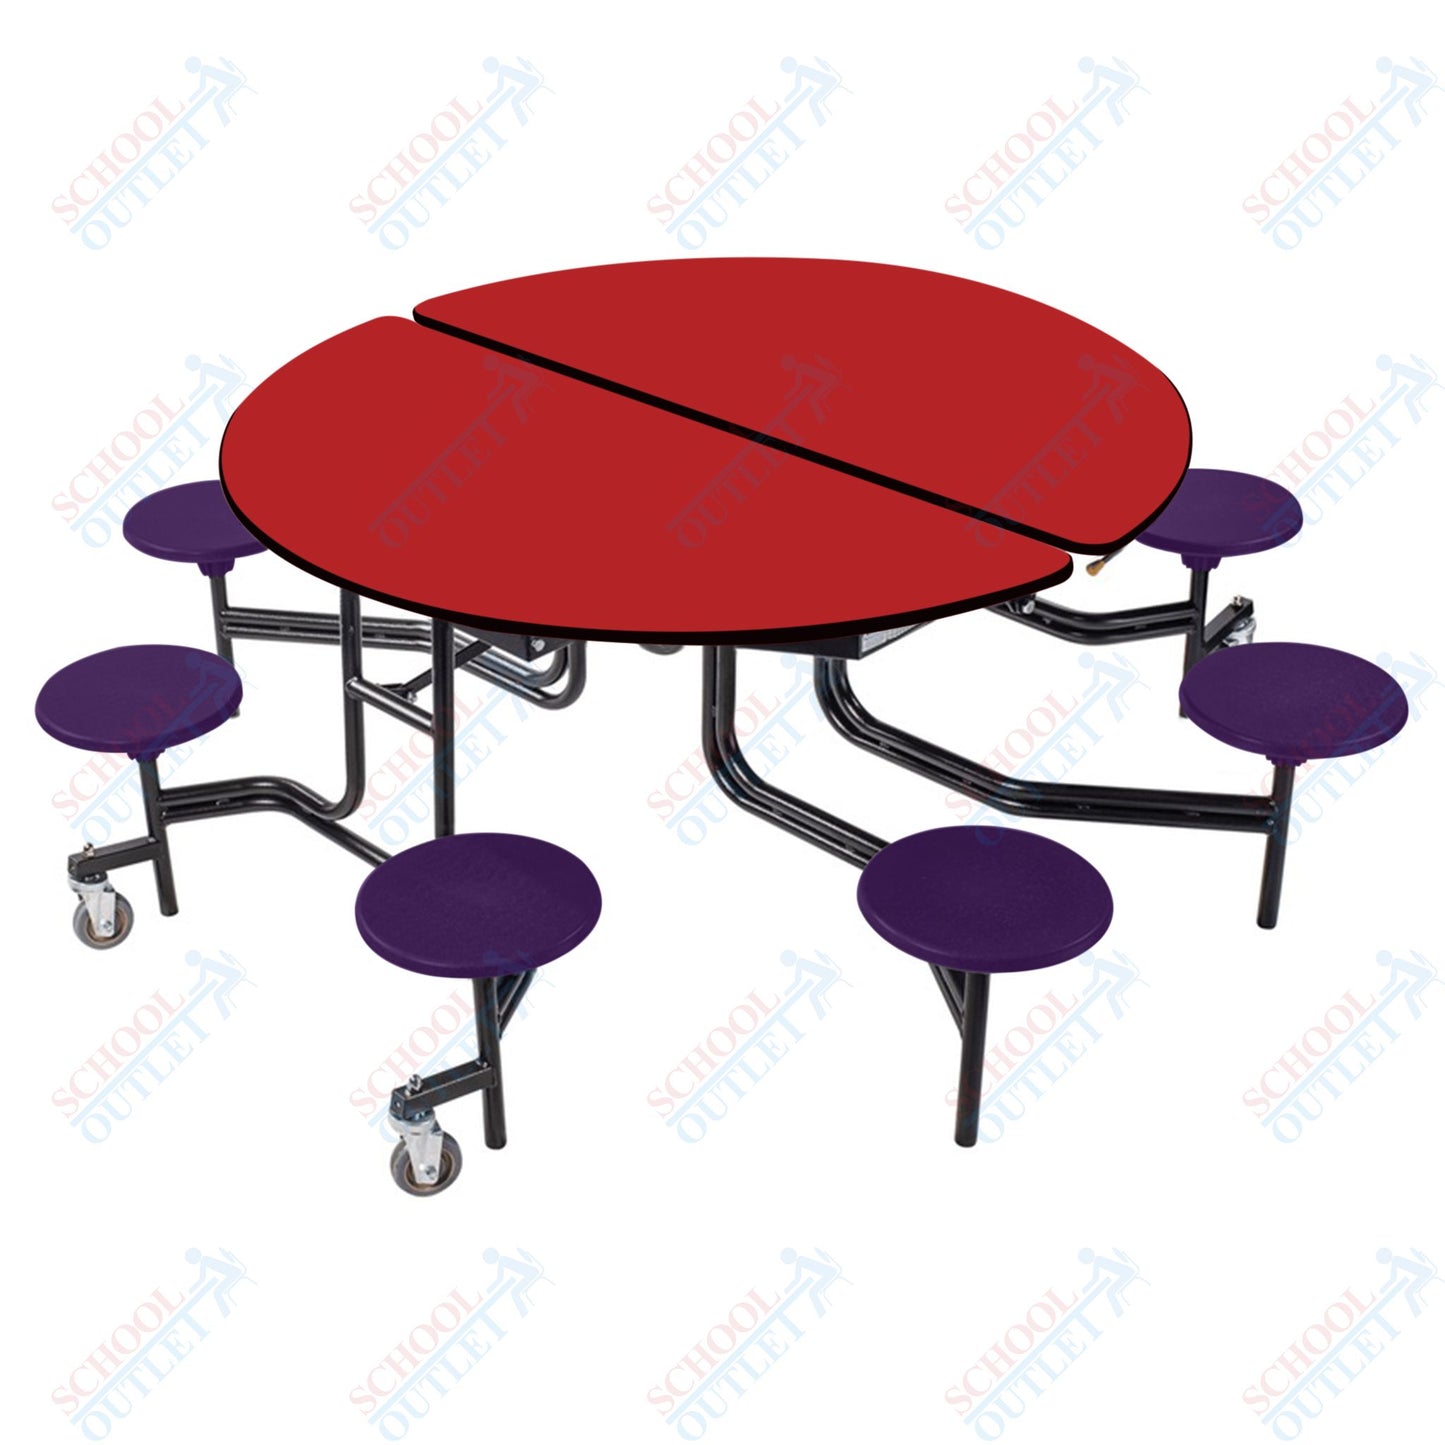 NPS 60" Round Mobile Cafeteria Table - 8 Stools - Plywood Core - T-Molding Edge - Black Powdercoated Frame